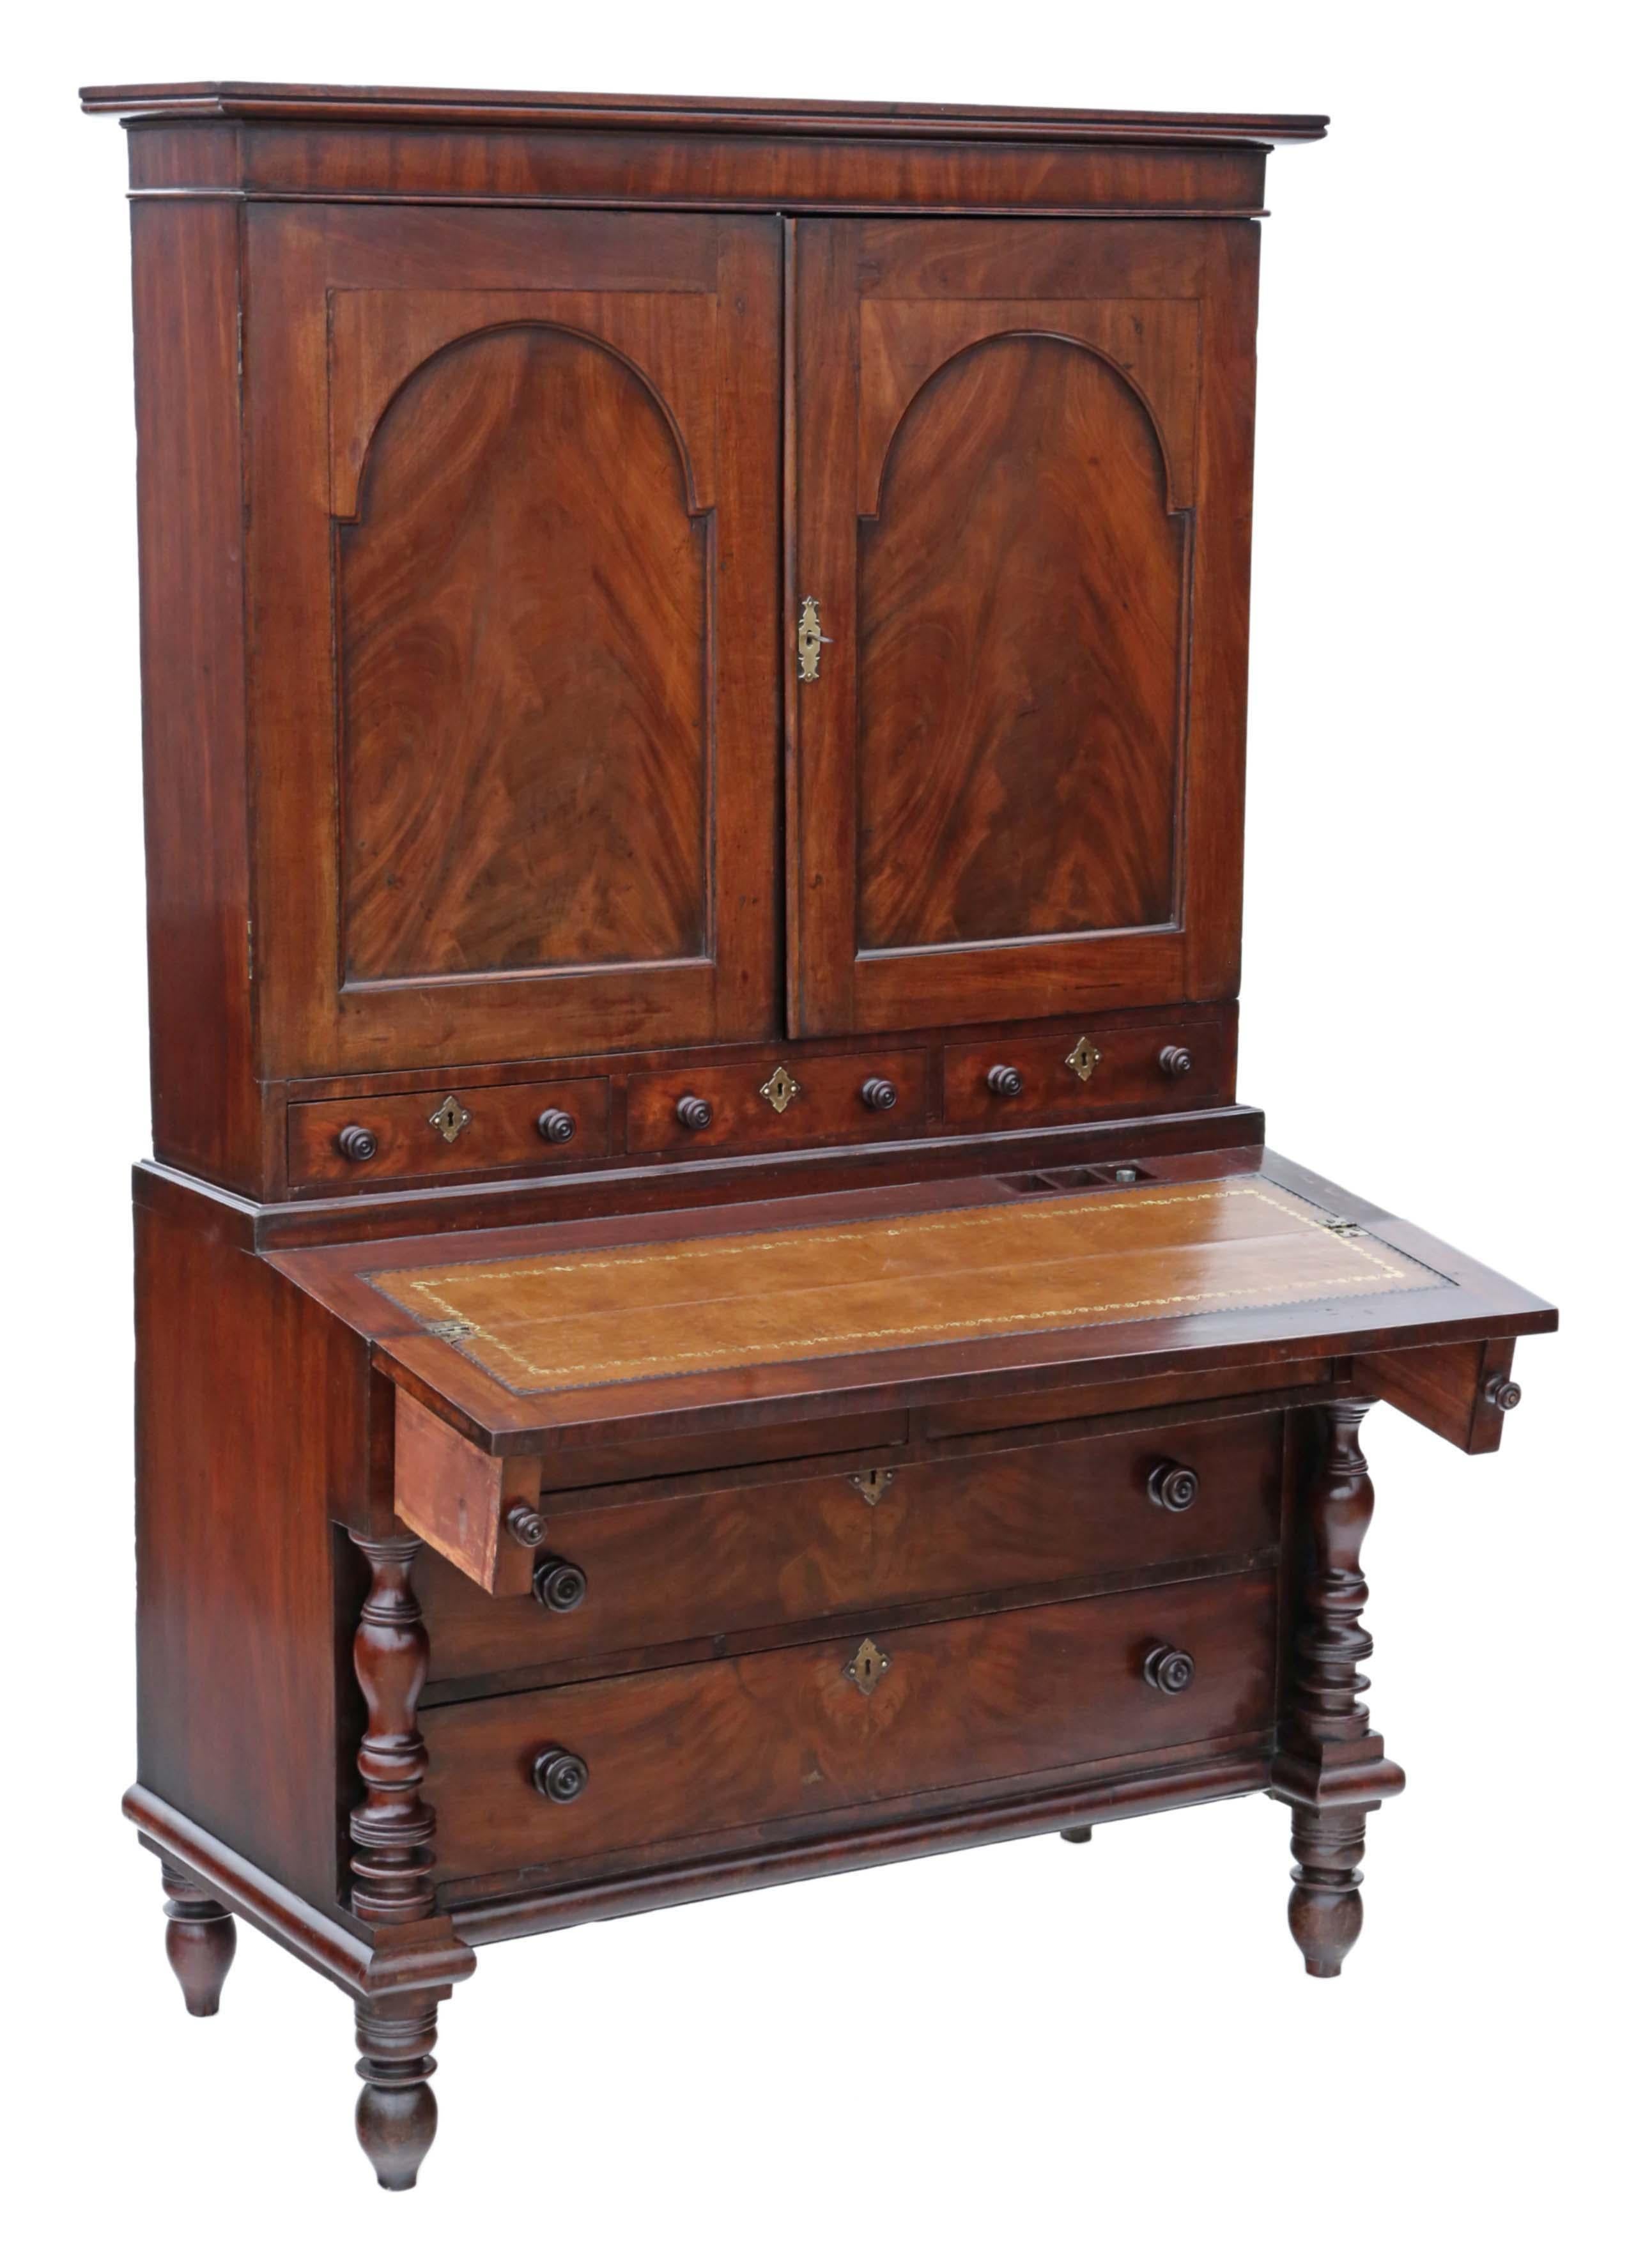 Antique High-Quality Mahogany Housekeeper's Cupboard with Secretaire, circa 1800 For Sale 1